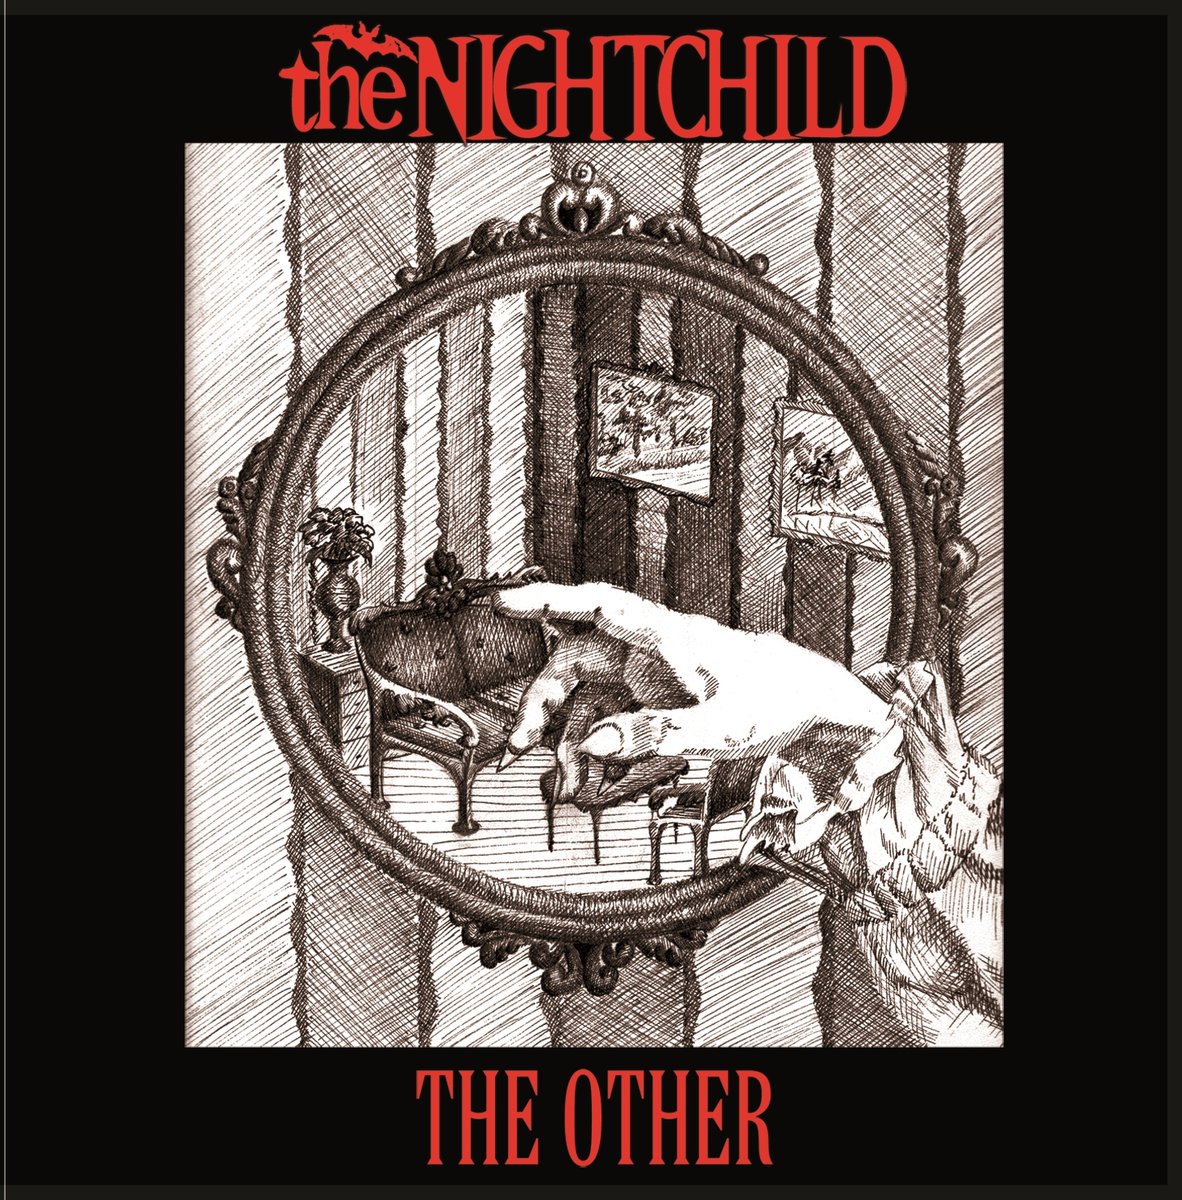 the NIGHTCHILD - The Other